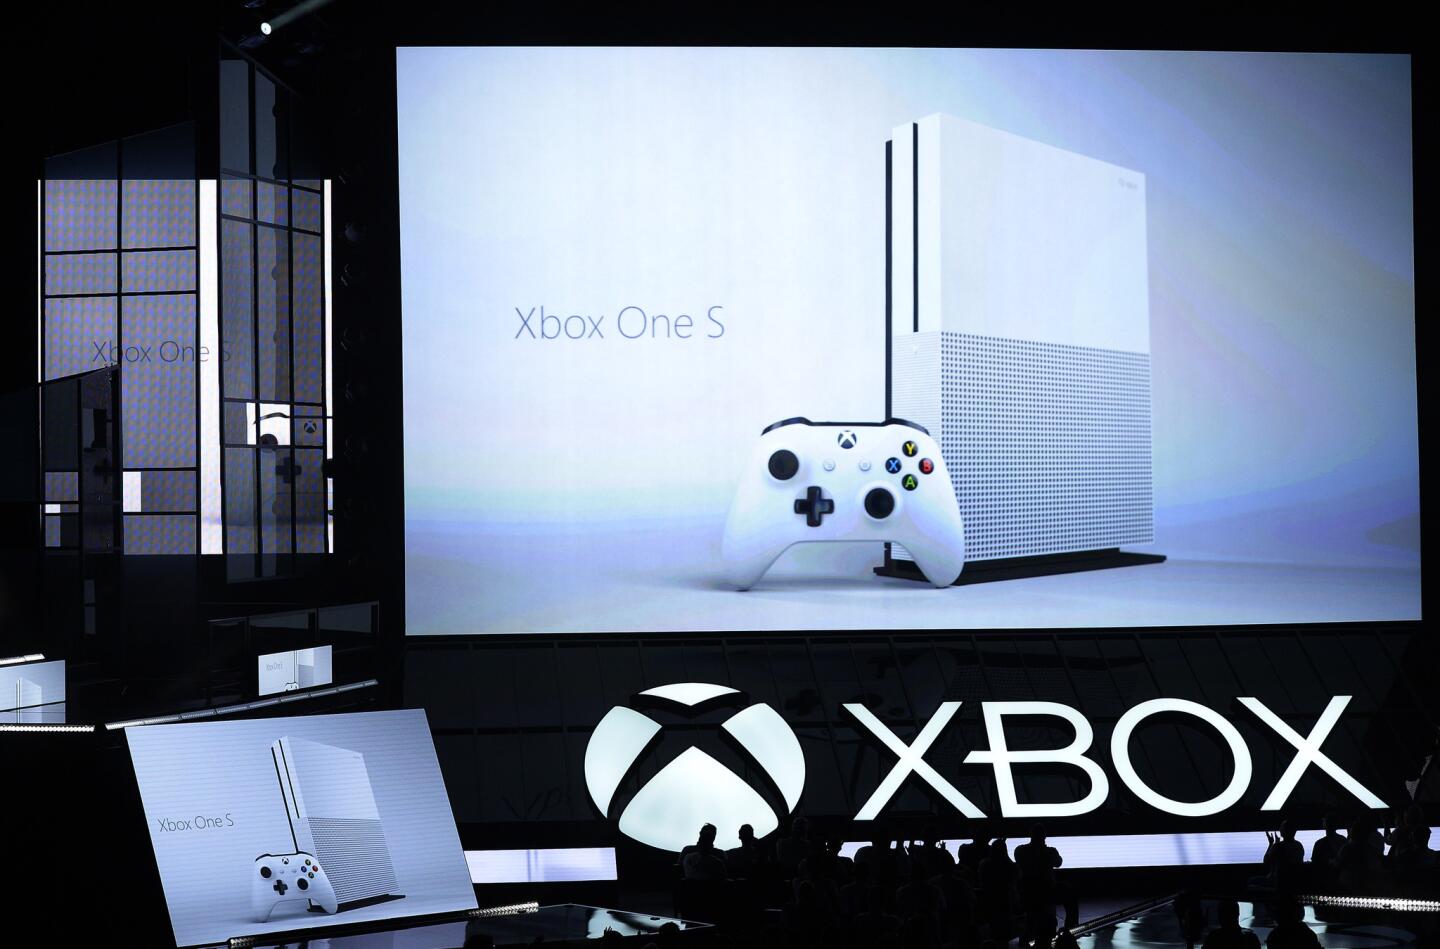 Microsoft Holds Its Xbox 2016 Briefing Duing Annual E3 Gaming Conference